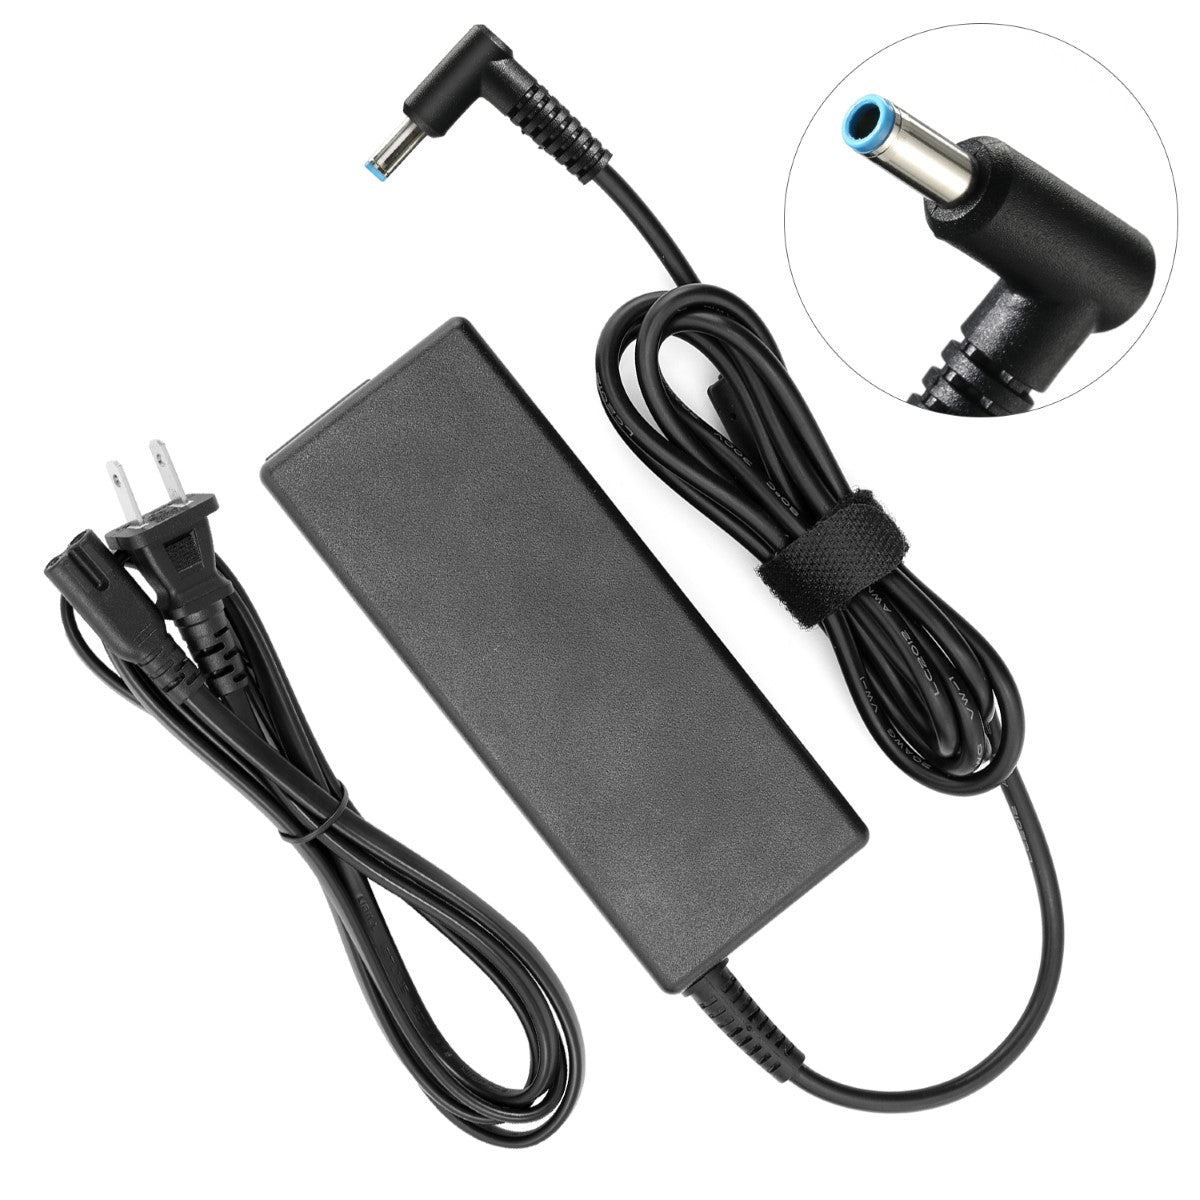 AC Adapter Charger for HP Pavilion 14-ab100 Laptop.